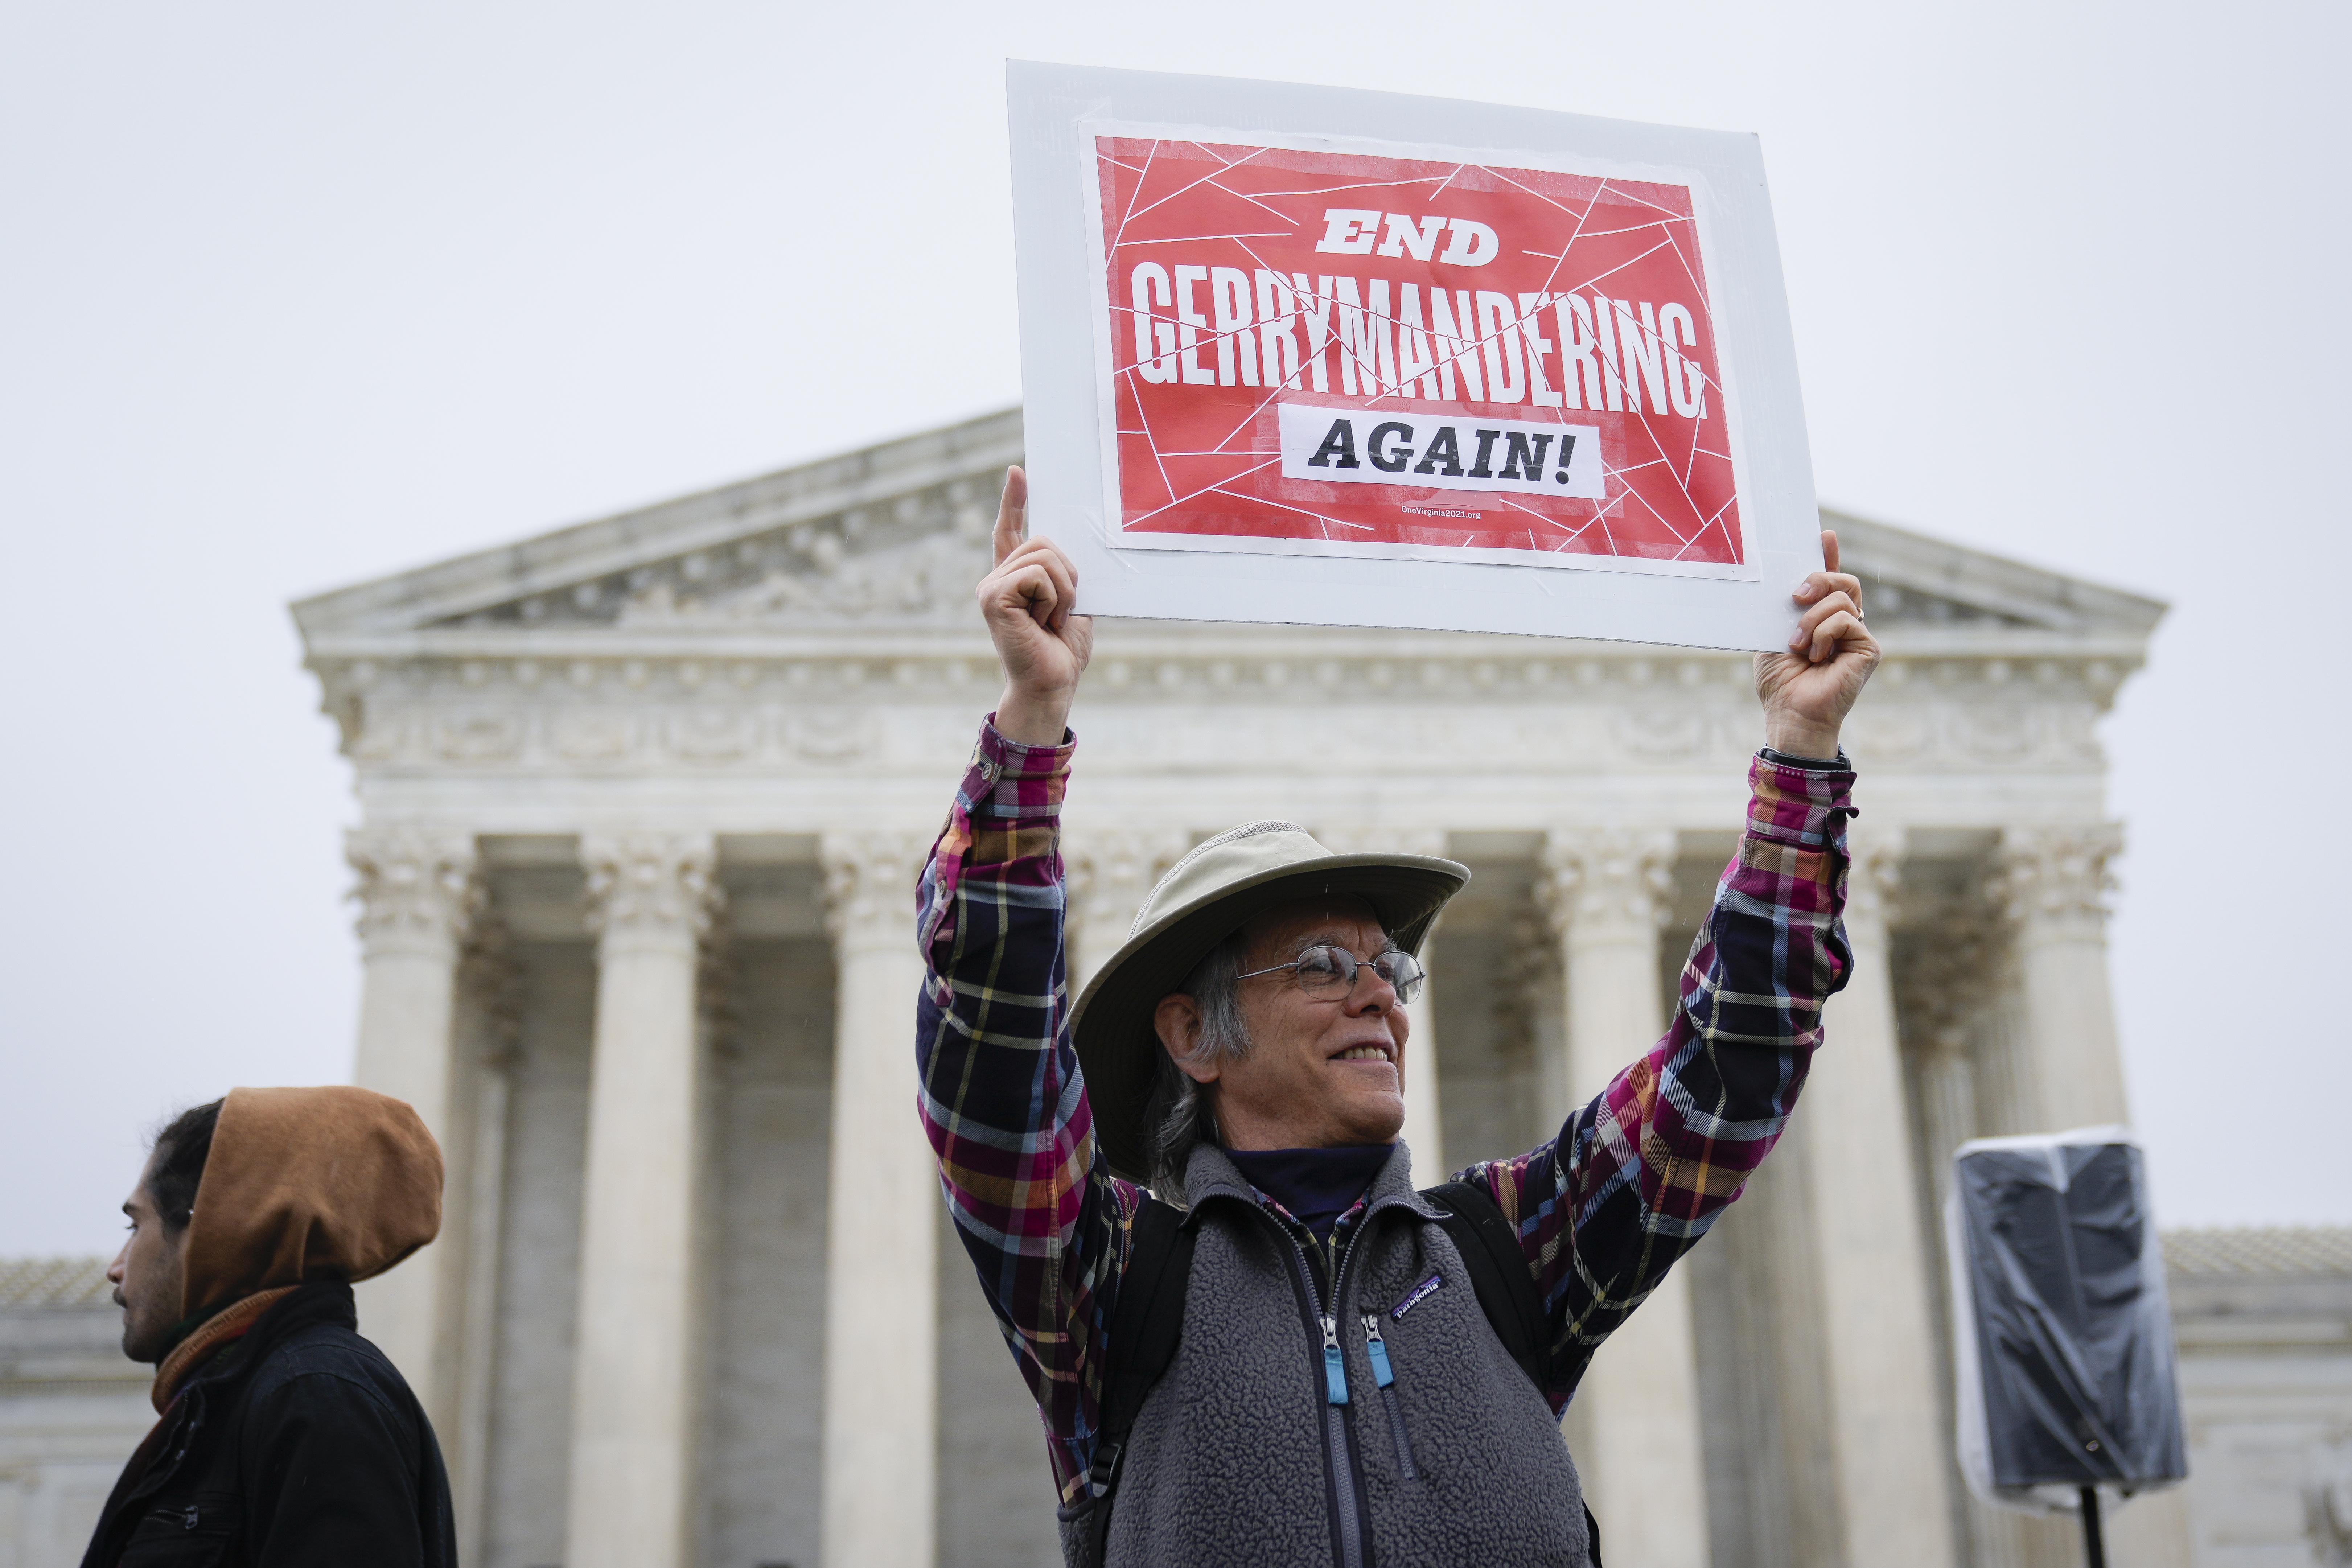 oting rights activists rally outside the U.S. Supreme Court during oral arguments in the Moore v. Harper case December 7, 2022 in Washington, DC. They're wearing a cowboy hat and carrying a sign that says "end Gerrymandering again!"